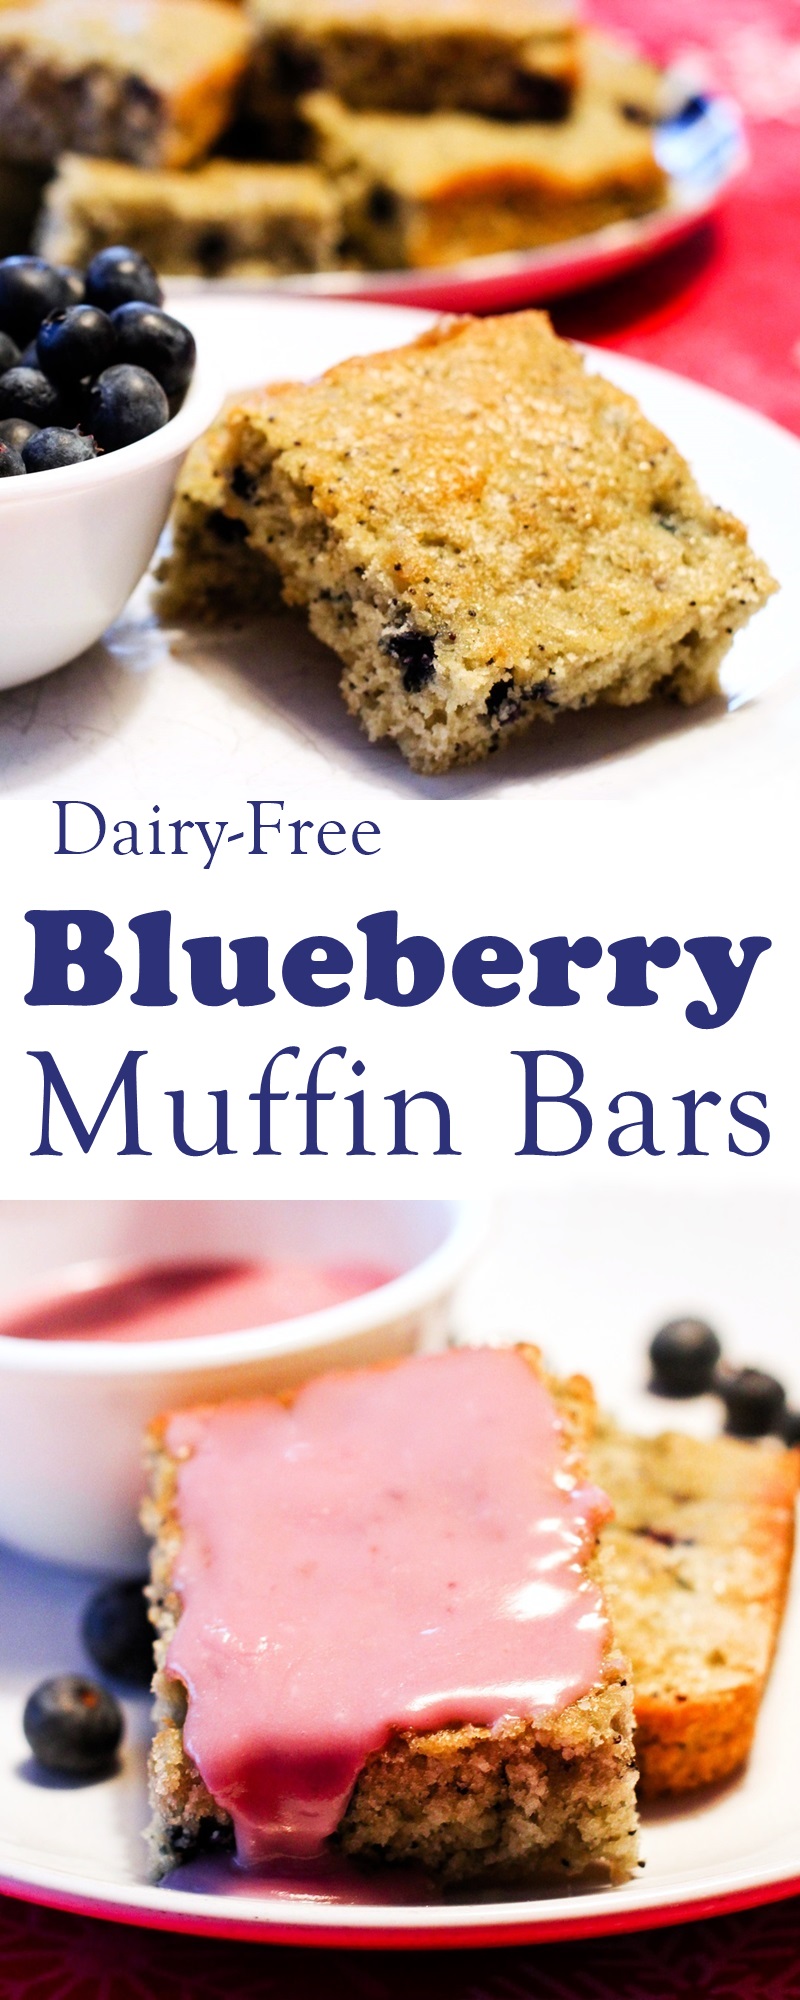 Dairy-Free Blueberry Muffin Bars Recipe - A mom and kid favorite with options for all